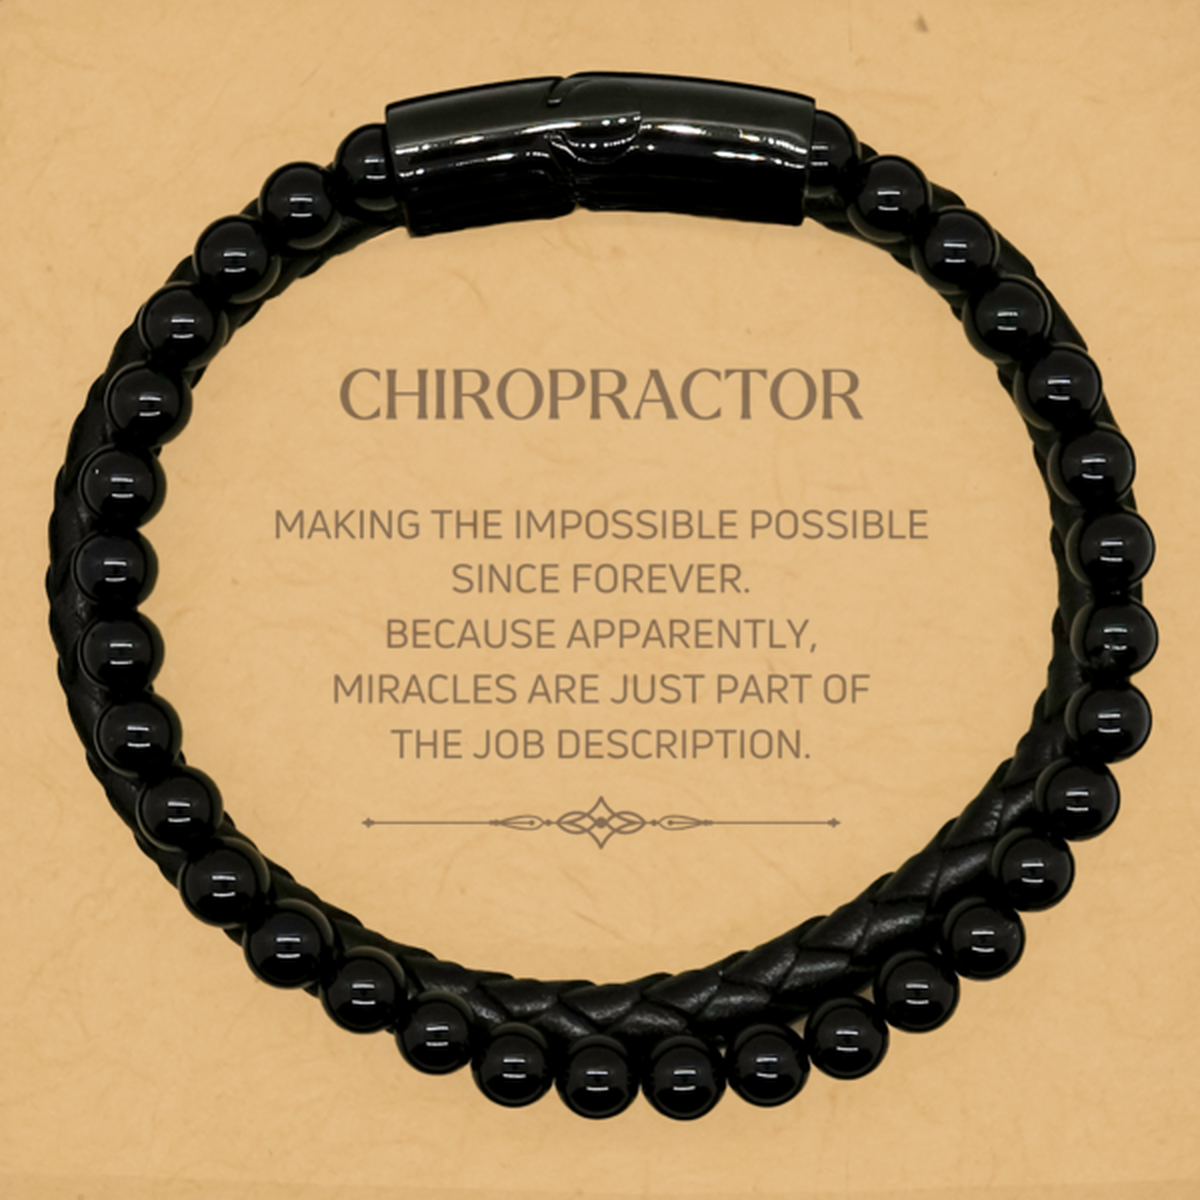 Funny Chiropractor Gifts, Miracles are just part of the job description, Inspirational Birthday Stone Leather Bracelets For Chiropractor, Men, Women, Coworkers, Friends, Boss